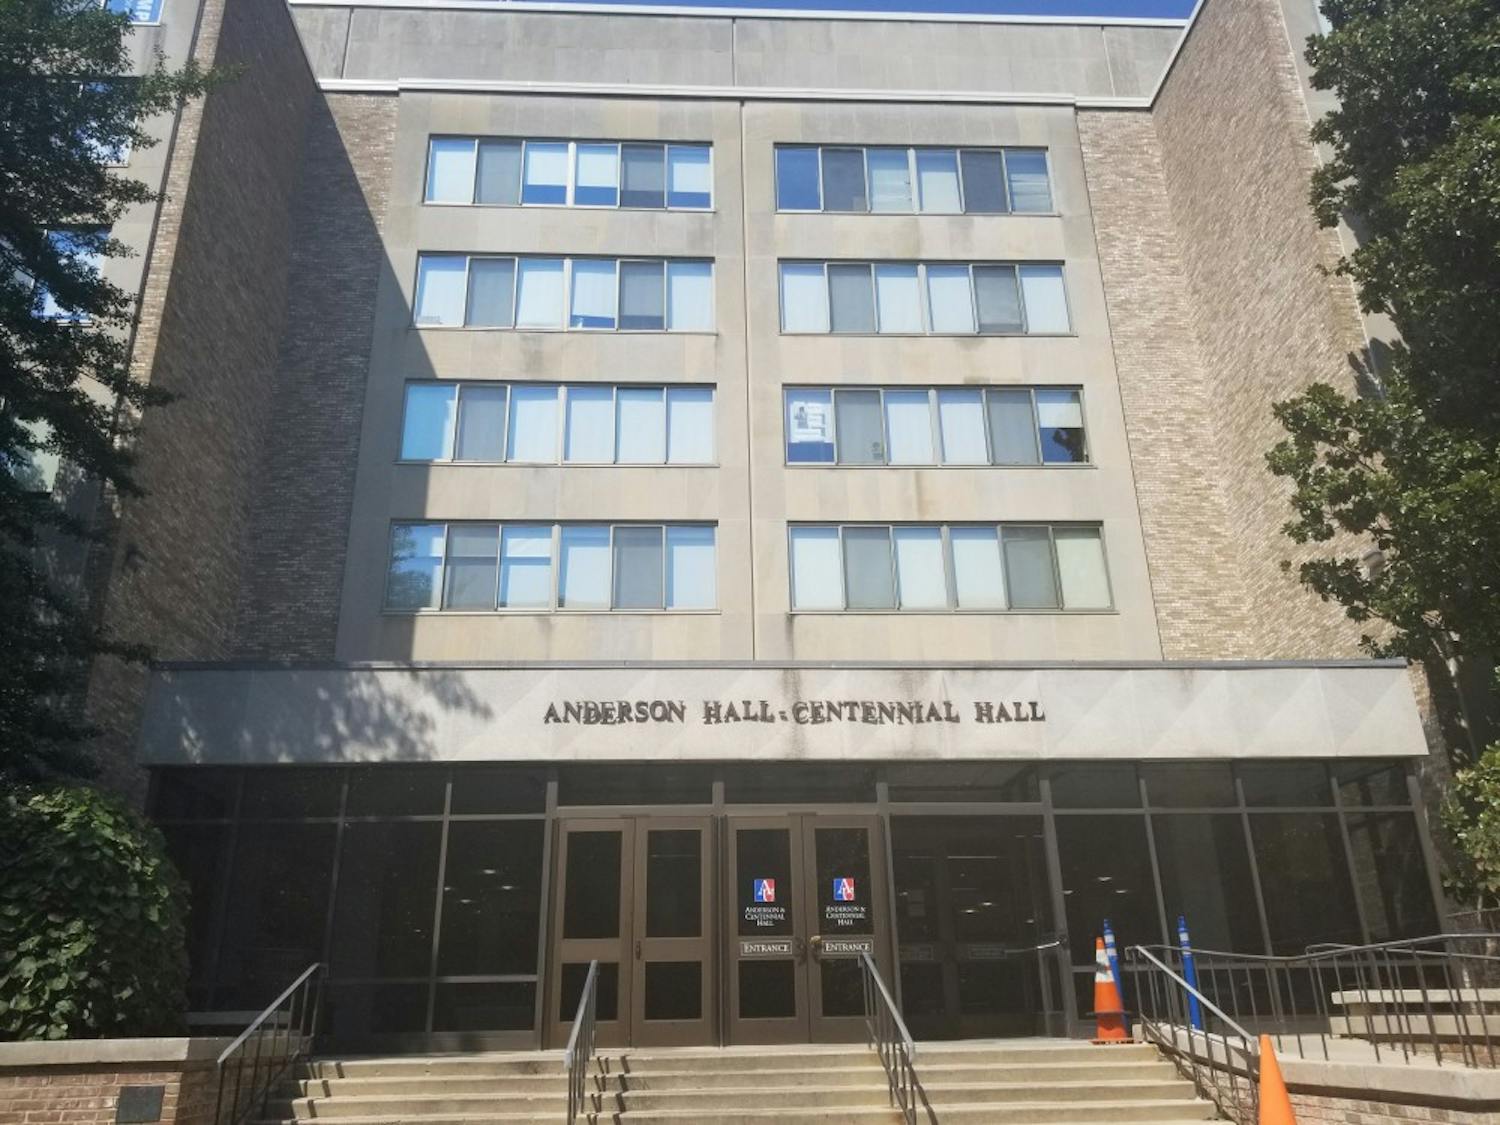 Stock Photo of Anderson and Centennial Hall